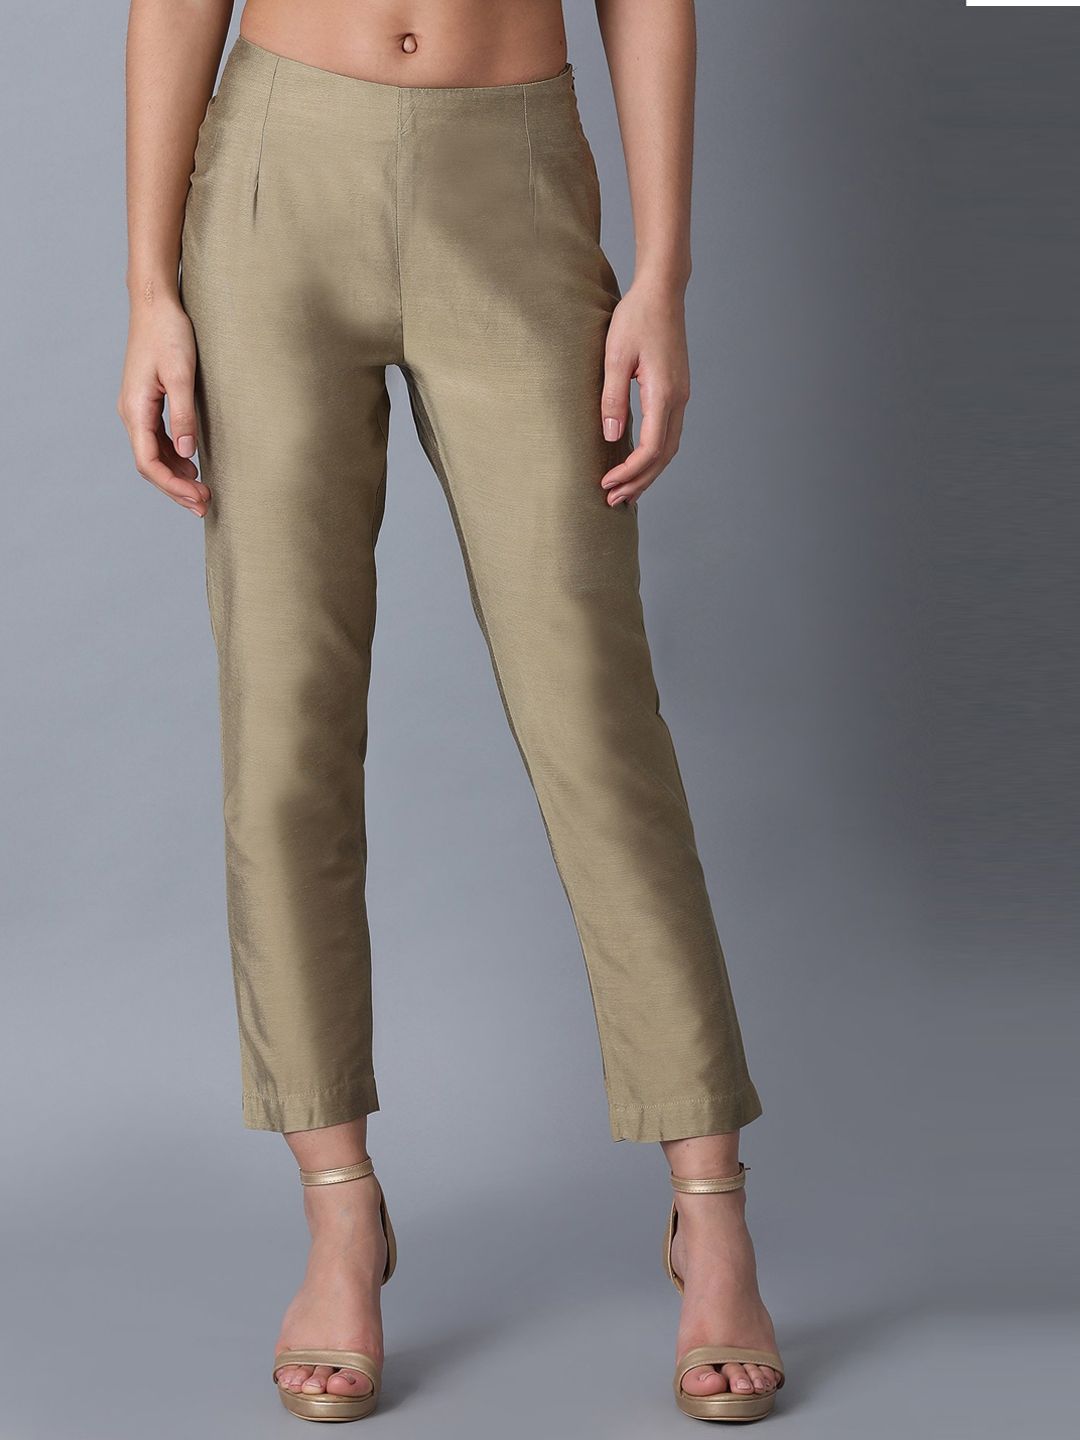 W Women Gold-Toned Slim Fit Cropped Trousers Price in India